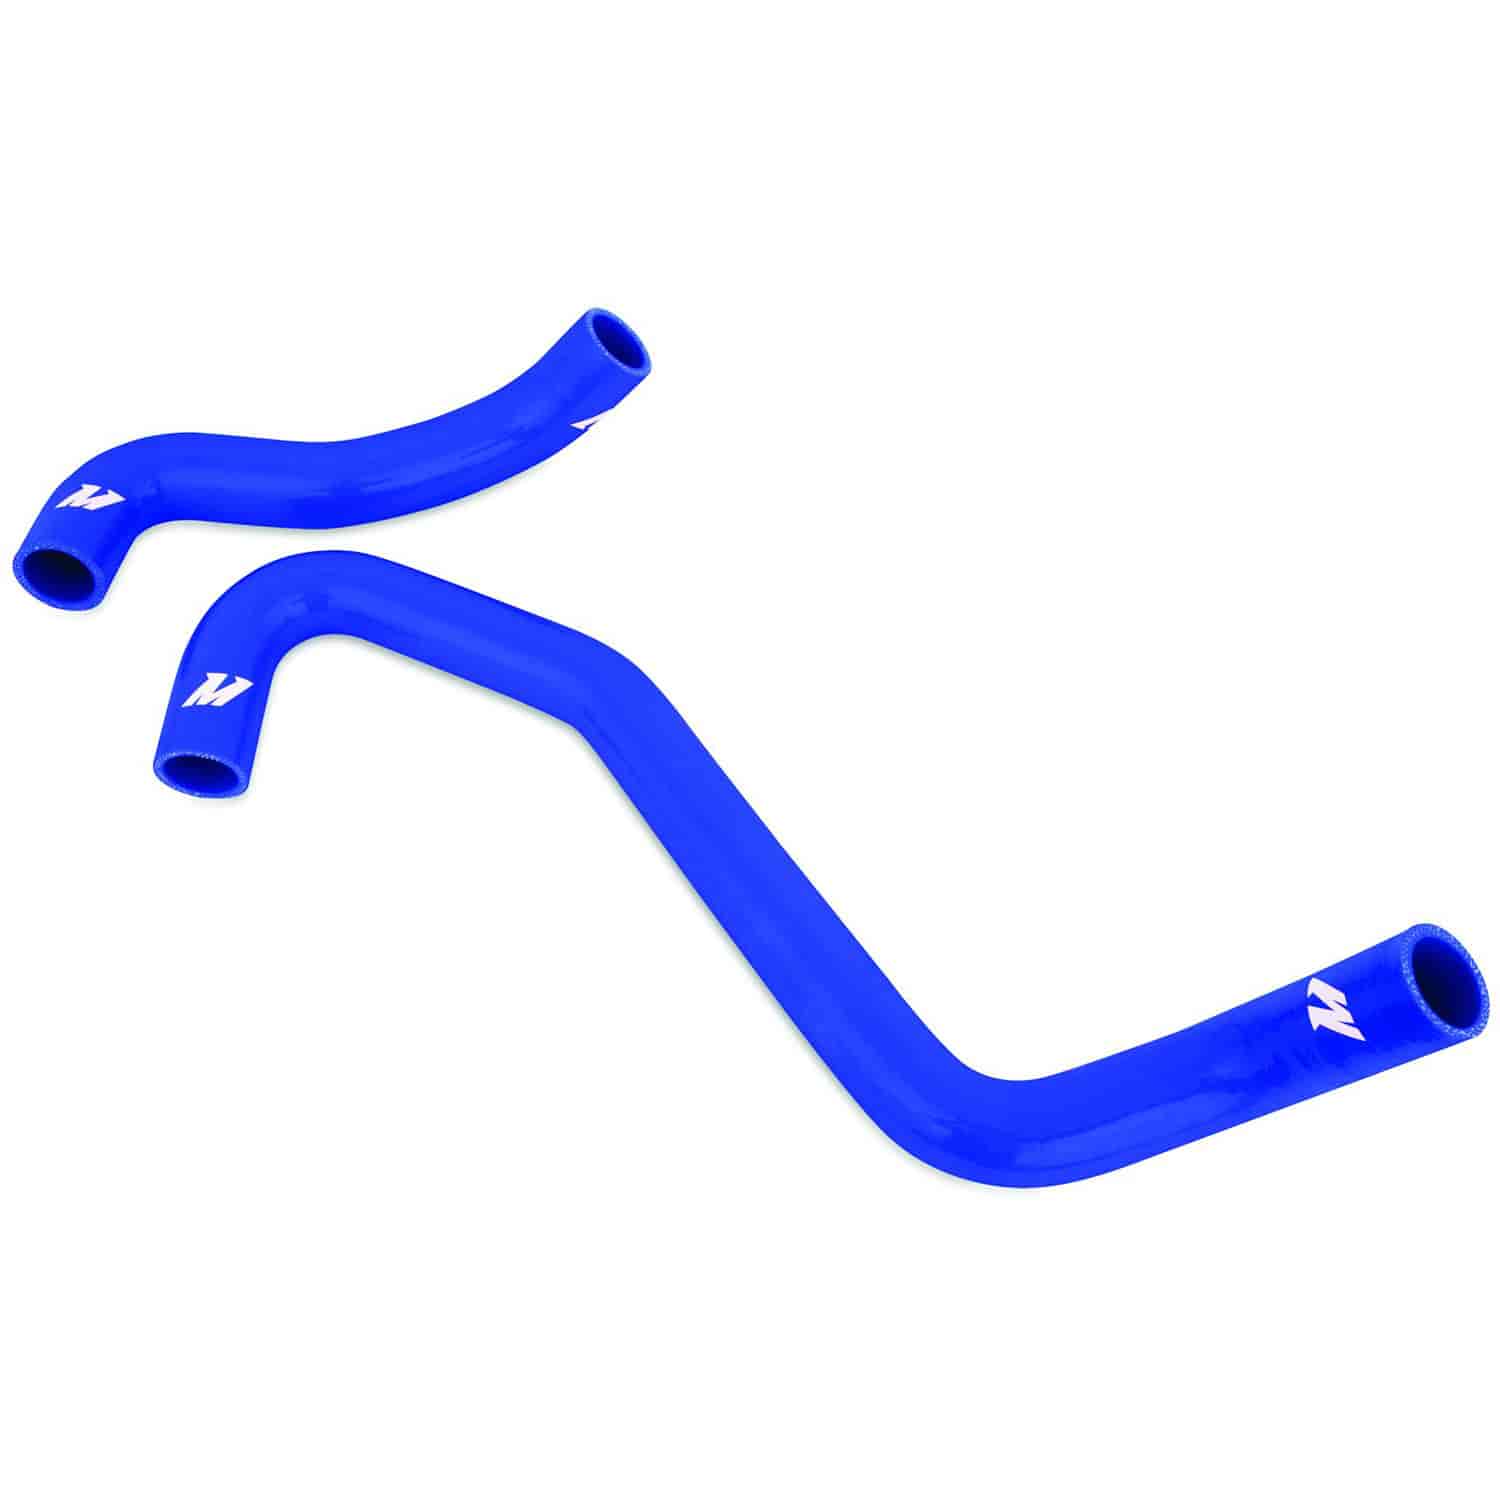 Silicone Radiator Hose Kit for Ford 7.3L Powerstroke Engines [Blue]